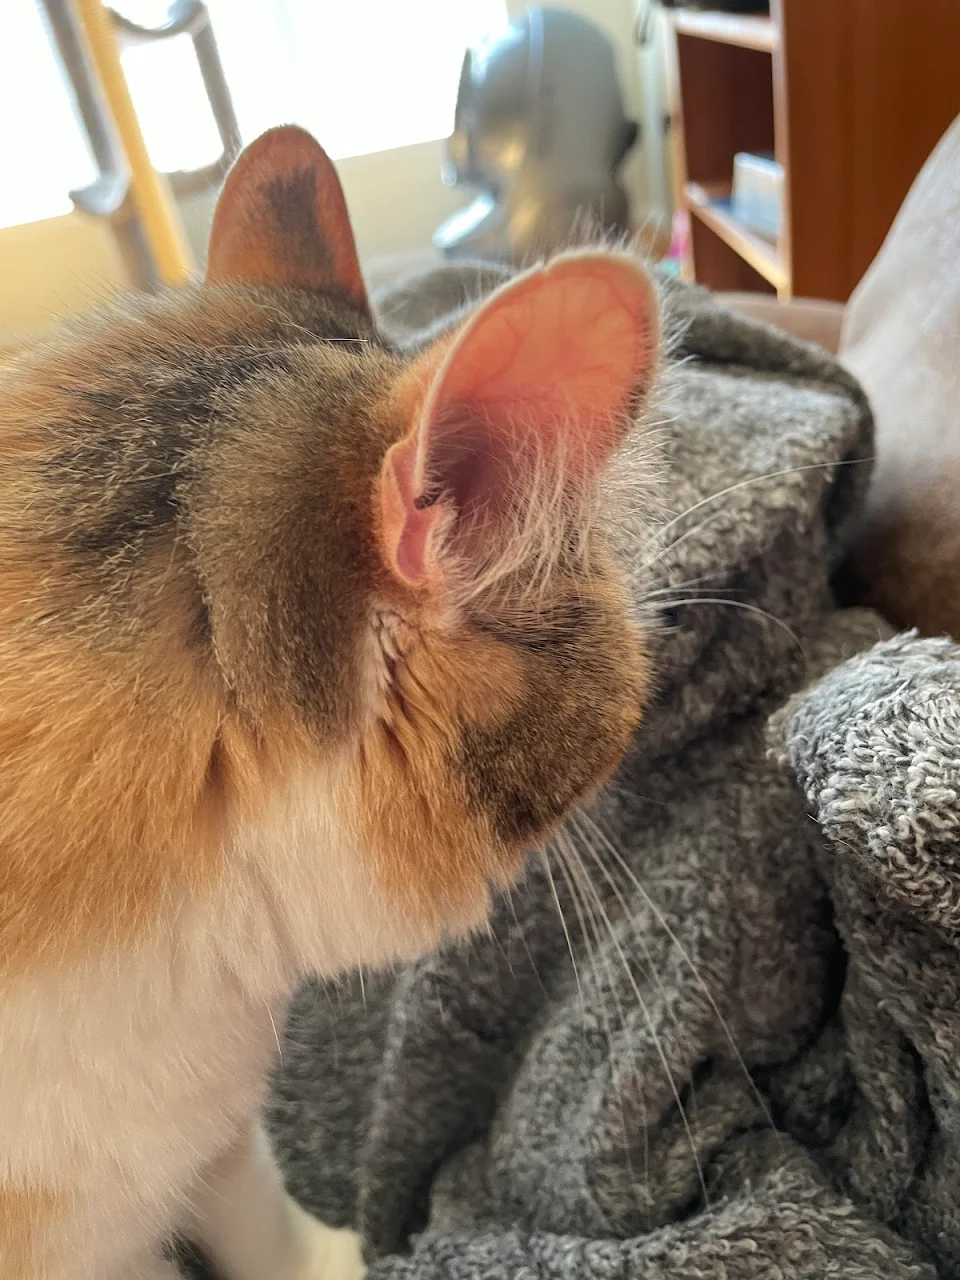 Is it normal for cats to have two layers of skin/cartilage at the base of their ear like this?